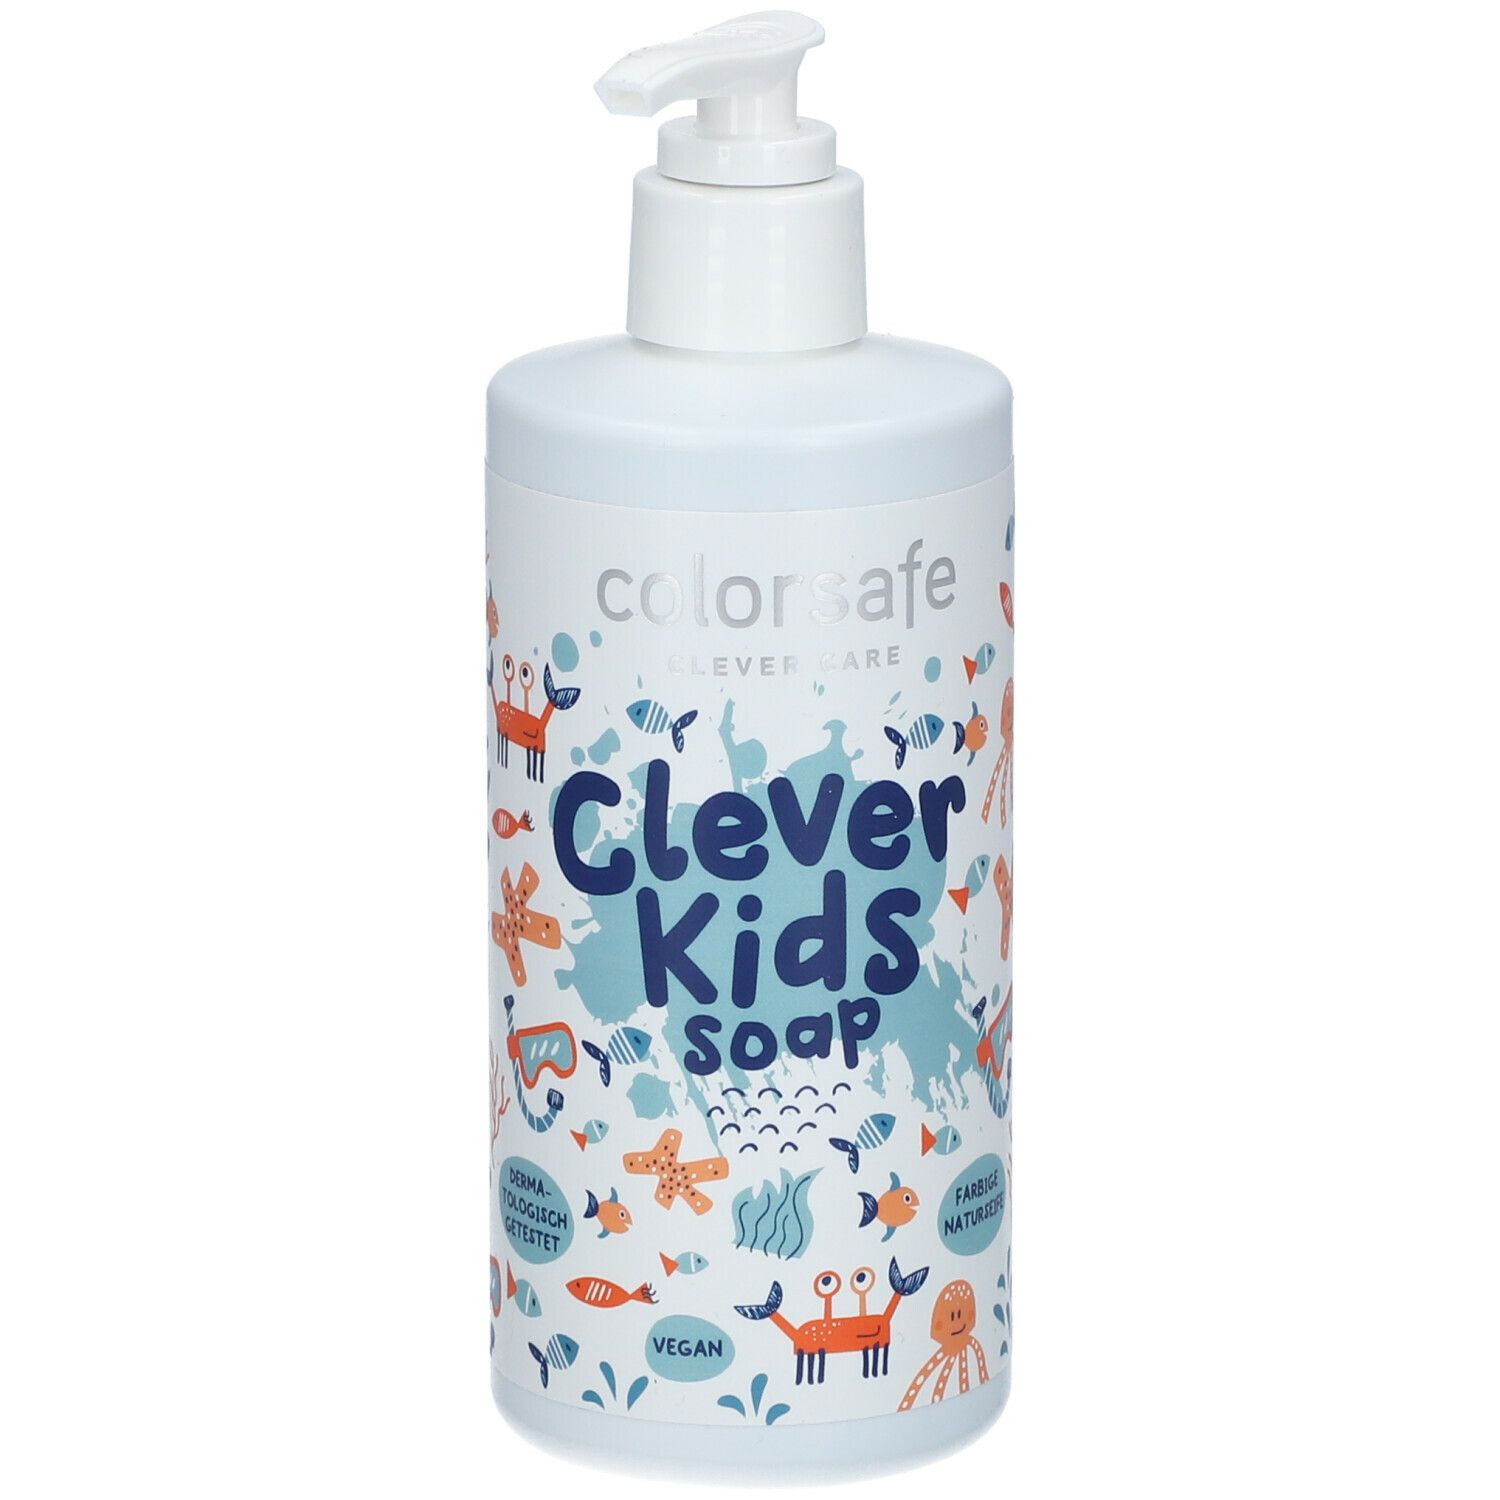 colorsafe CLEVER CARE DIE BLAUE clevere Kinderseife